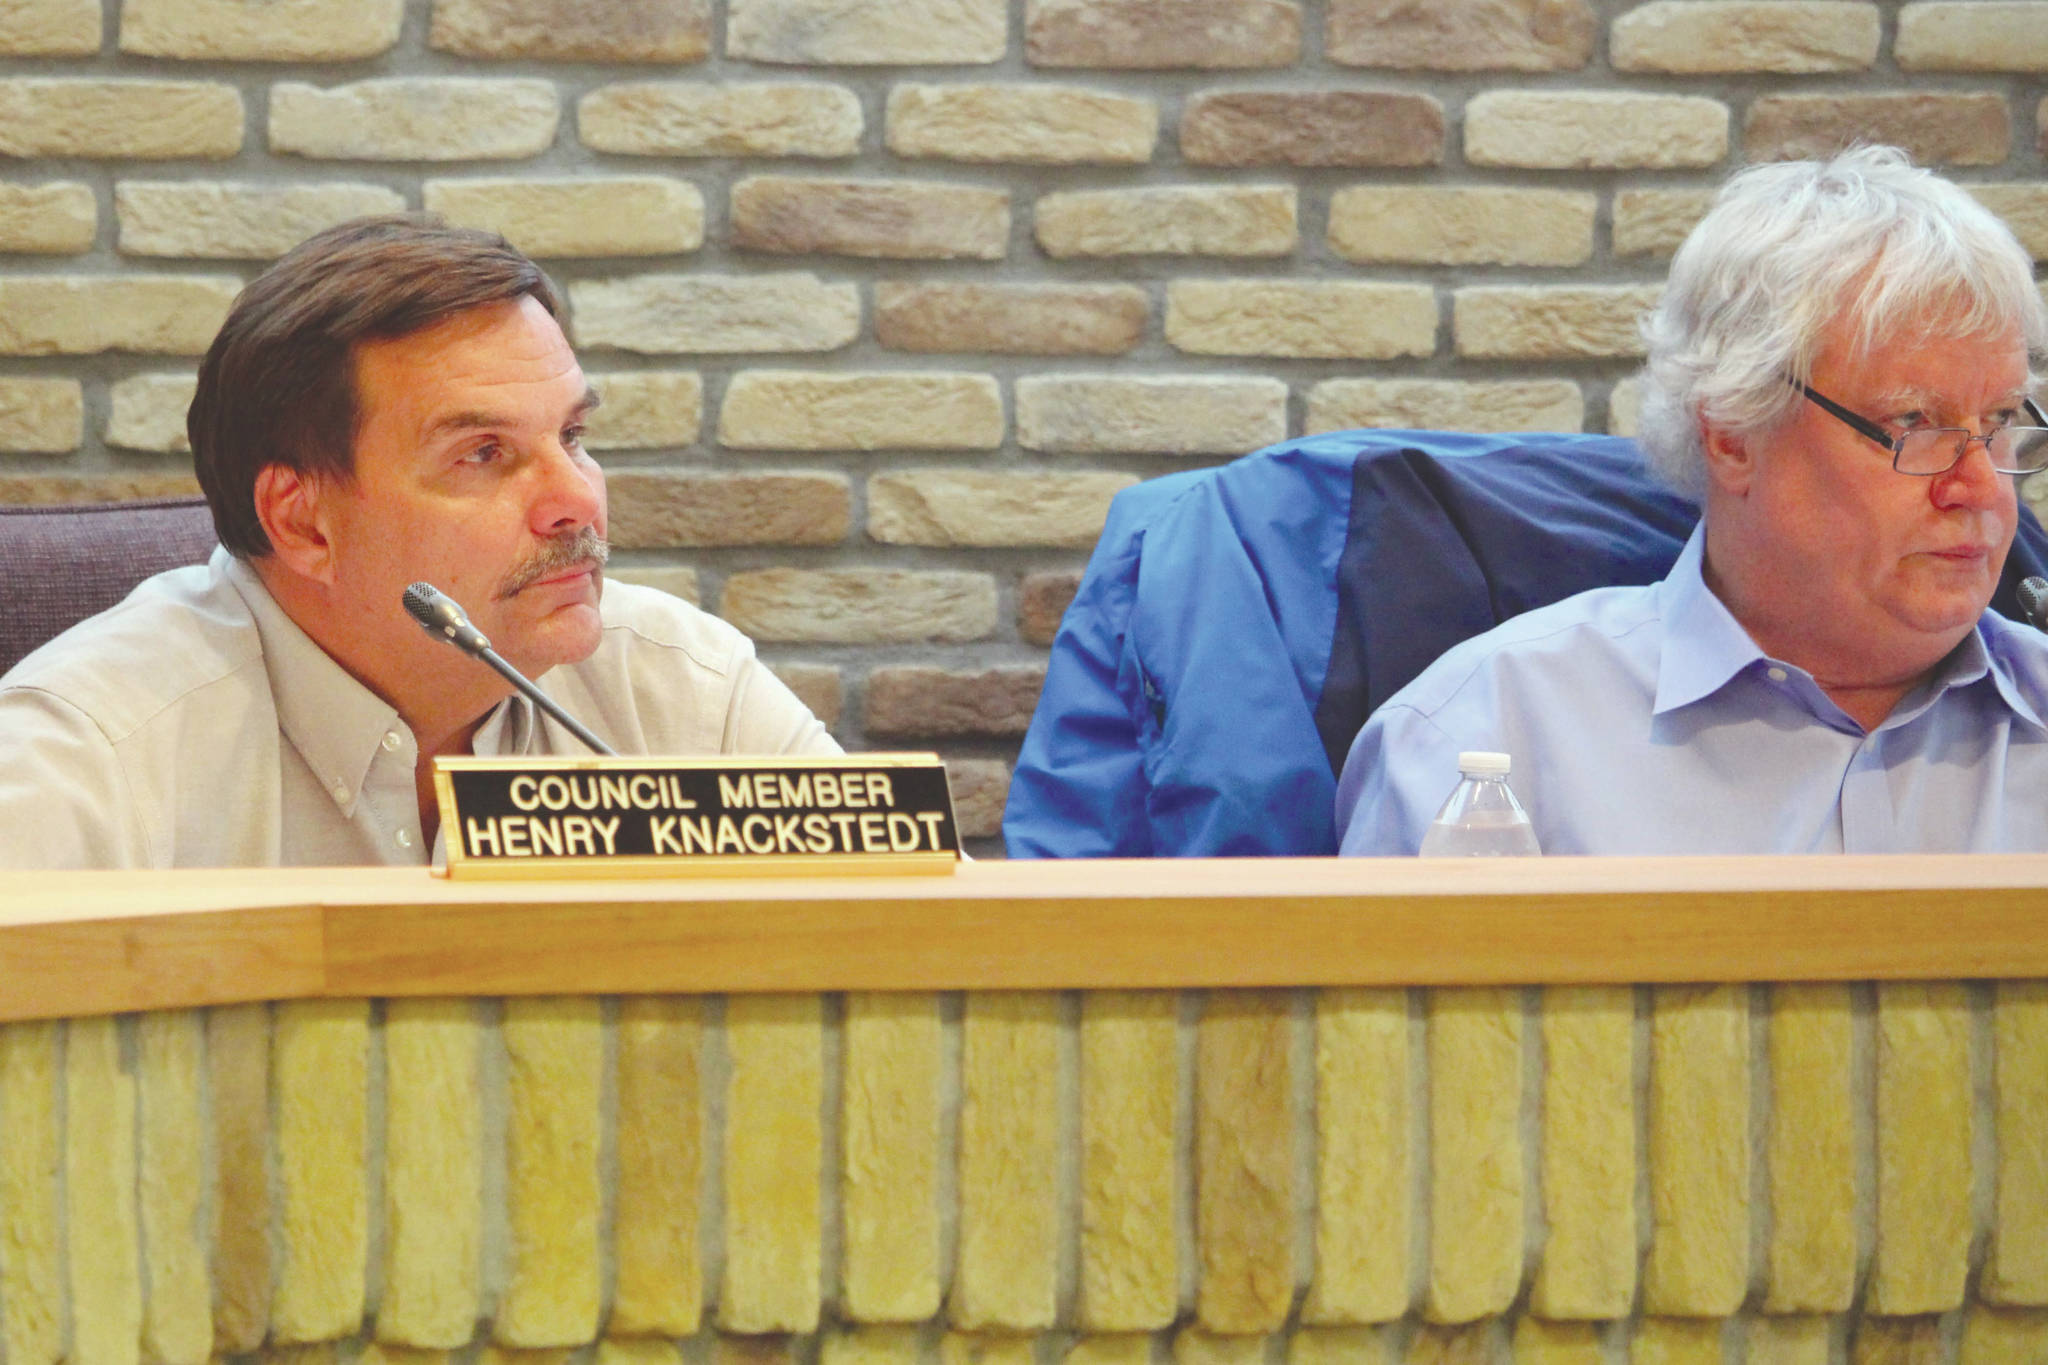 Kenai City Council Members Henry Knackstedt, left, and Bob Molloy, right, listen to public comments during the Kenai City Council Meeting on Wednesday, Sept. 18, 2019. (Photo by Brian Mazurek/Peninsula Clarion)